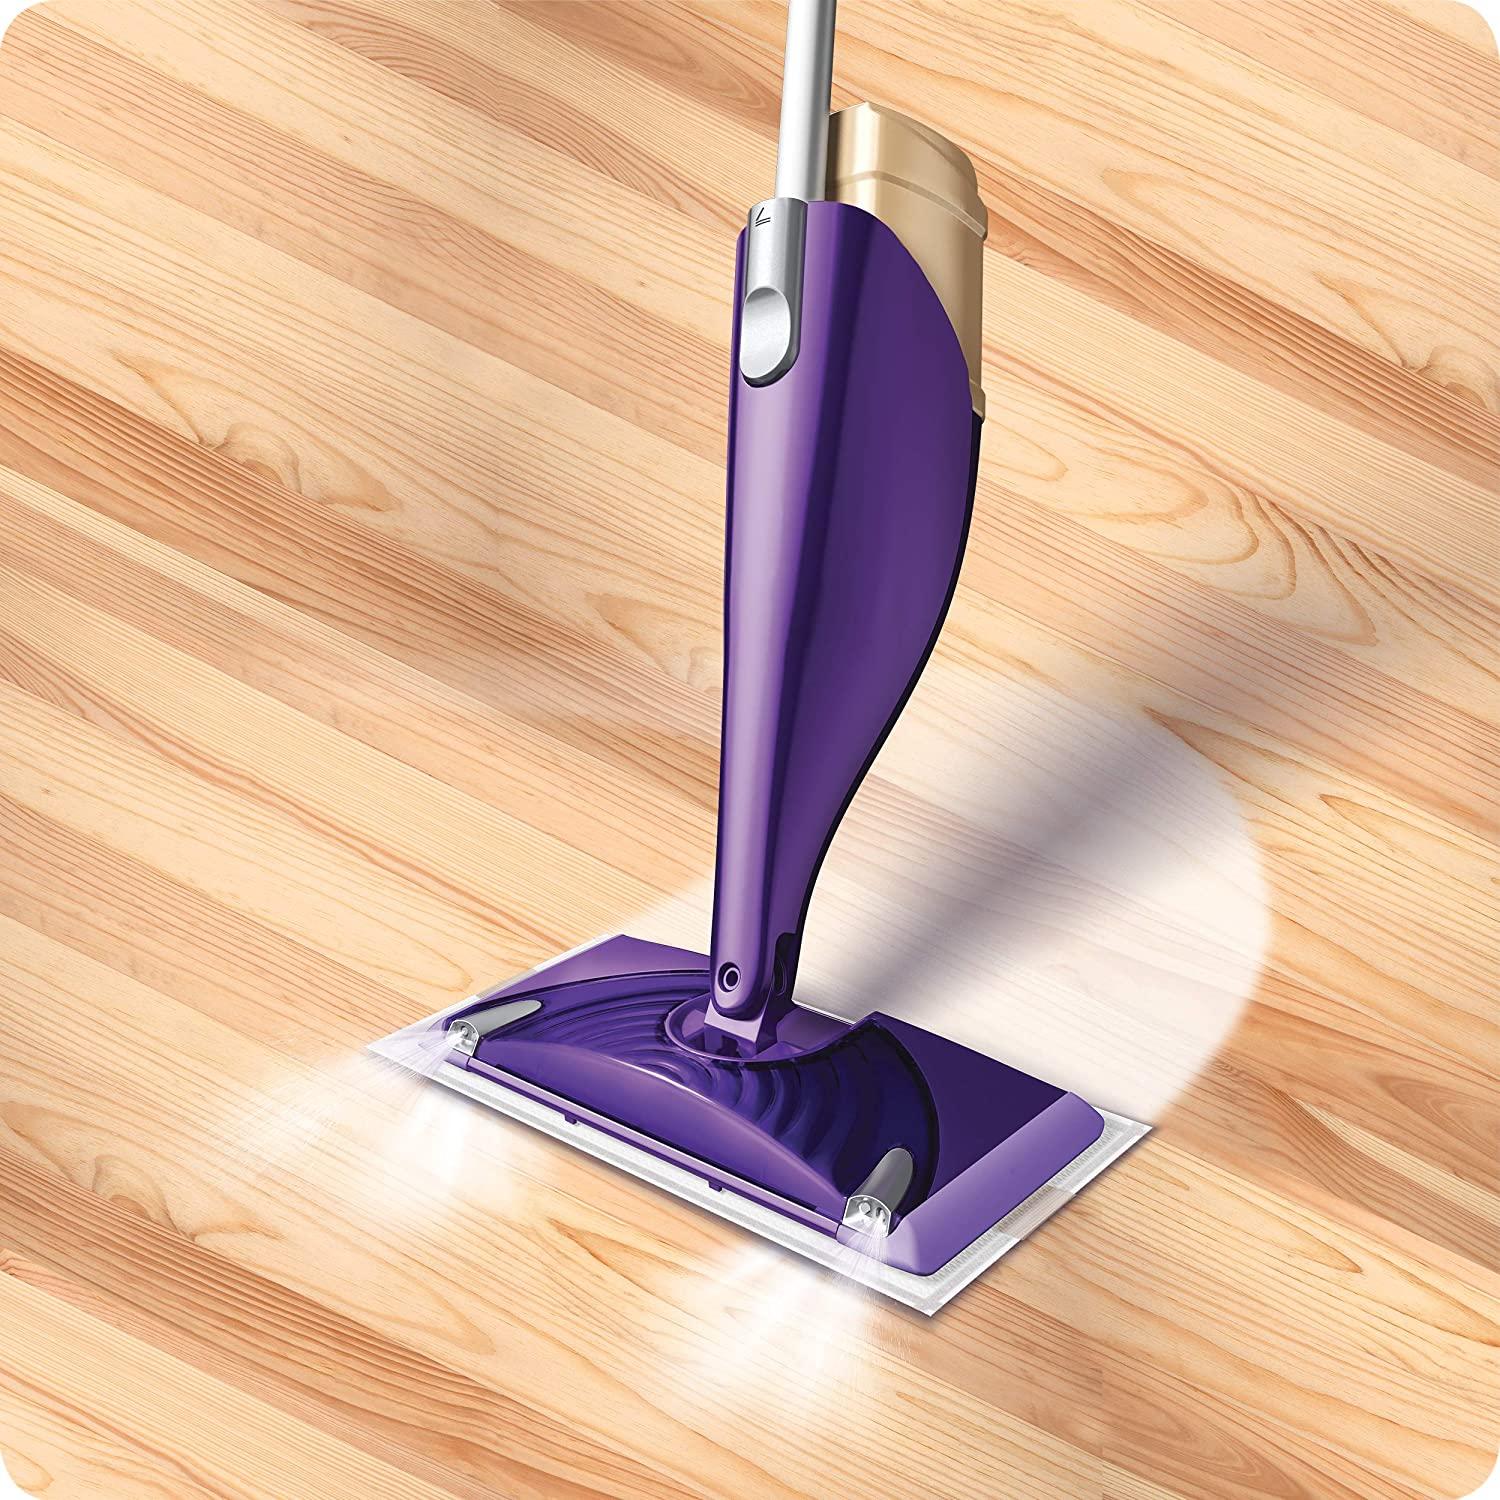 Swiffer® WetJet 26535 Multi-Surface Cleaner Solution Refill with